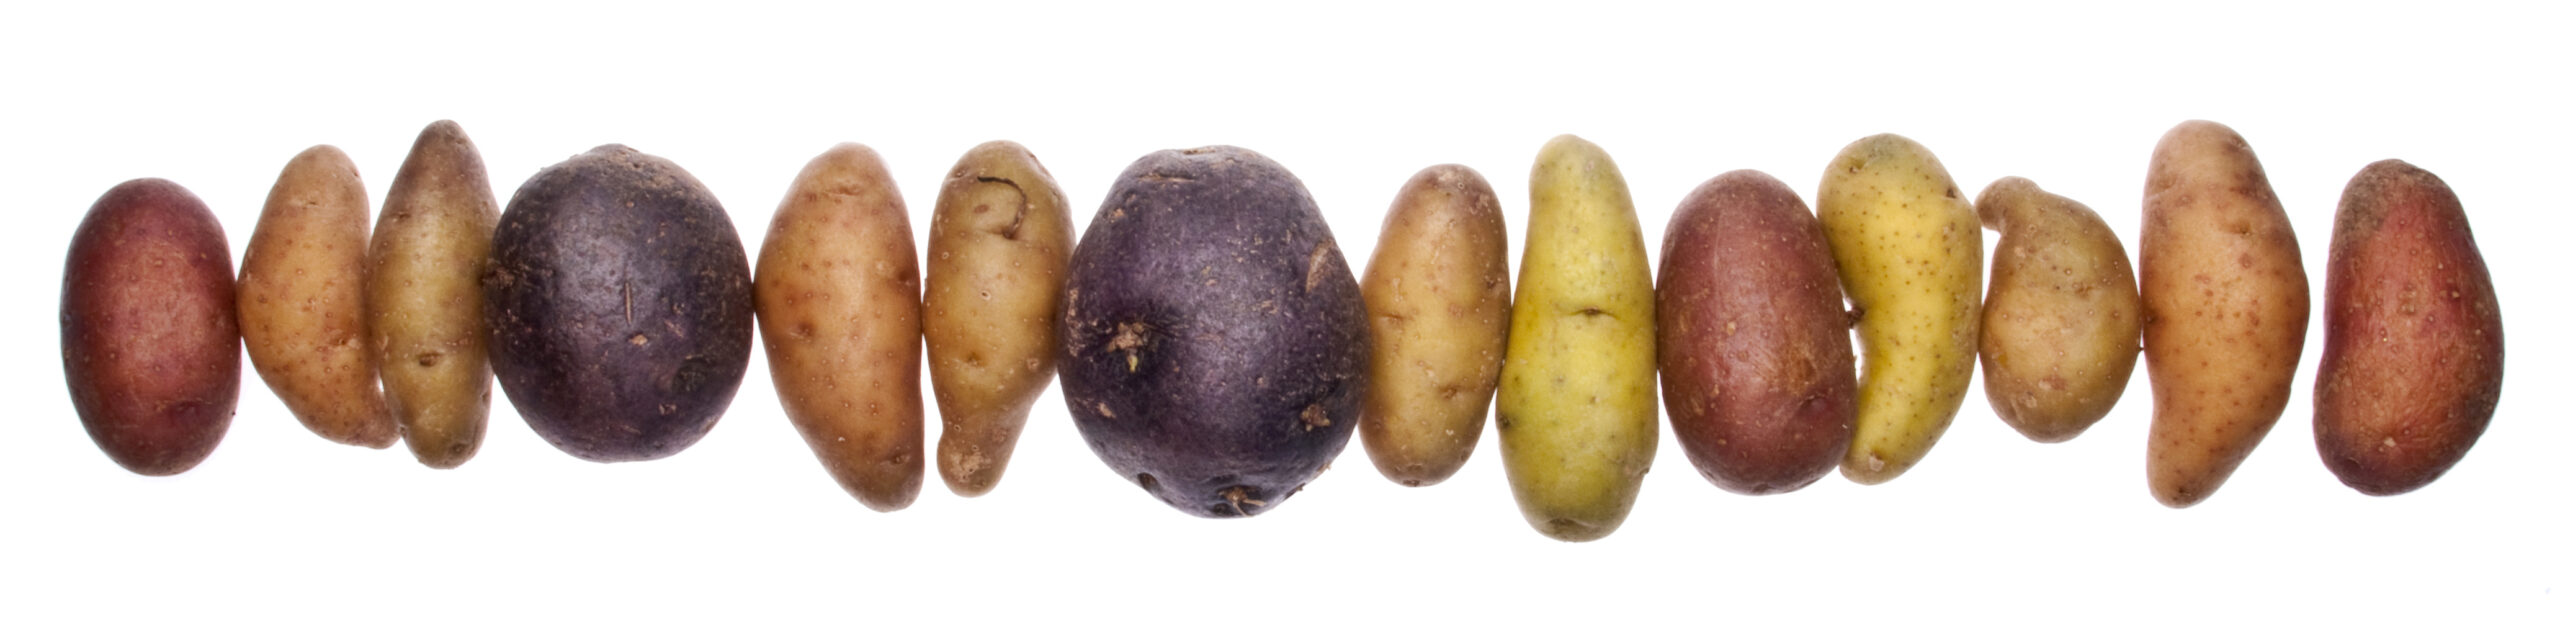 It's Not Them, It's You: Why Potatoes Don't Deserve Their Bad Reputation